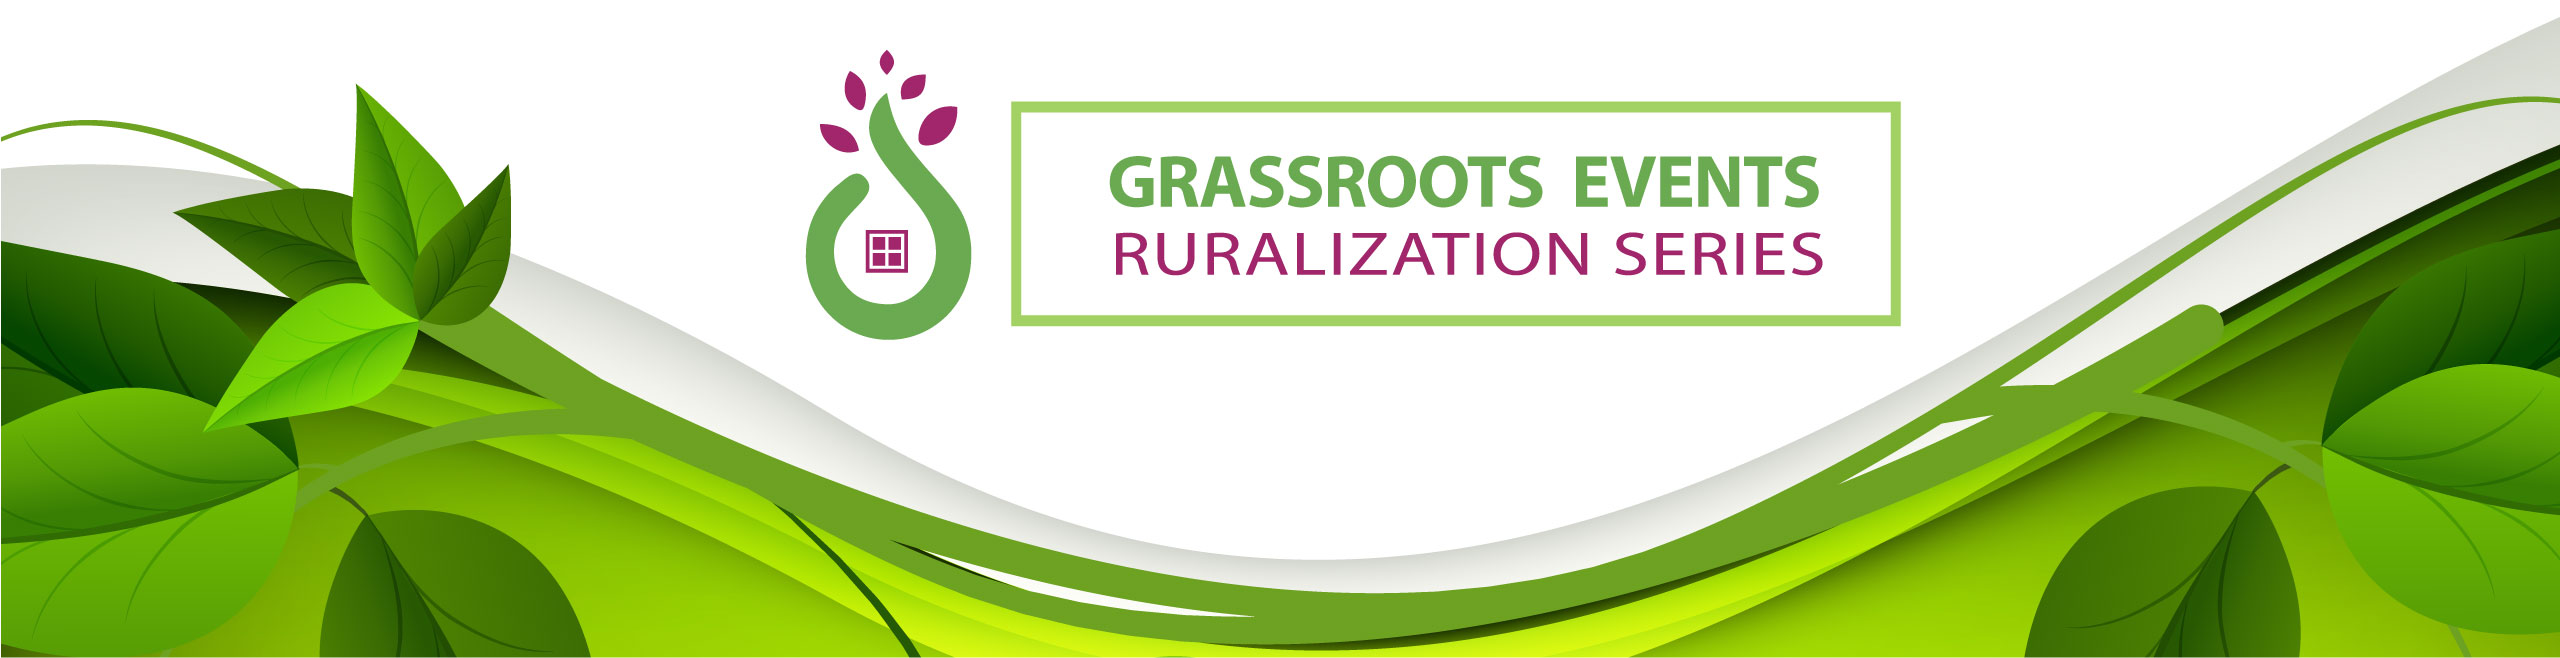 Grassroots-events-banner